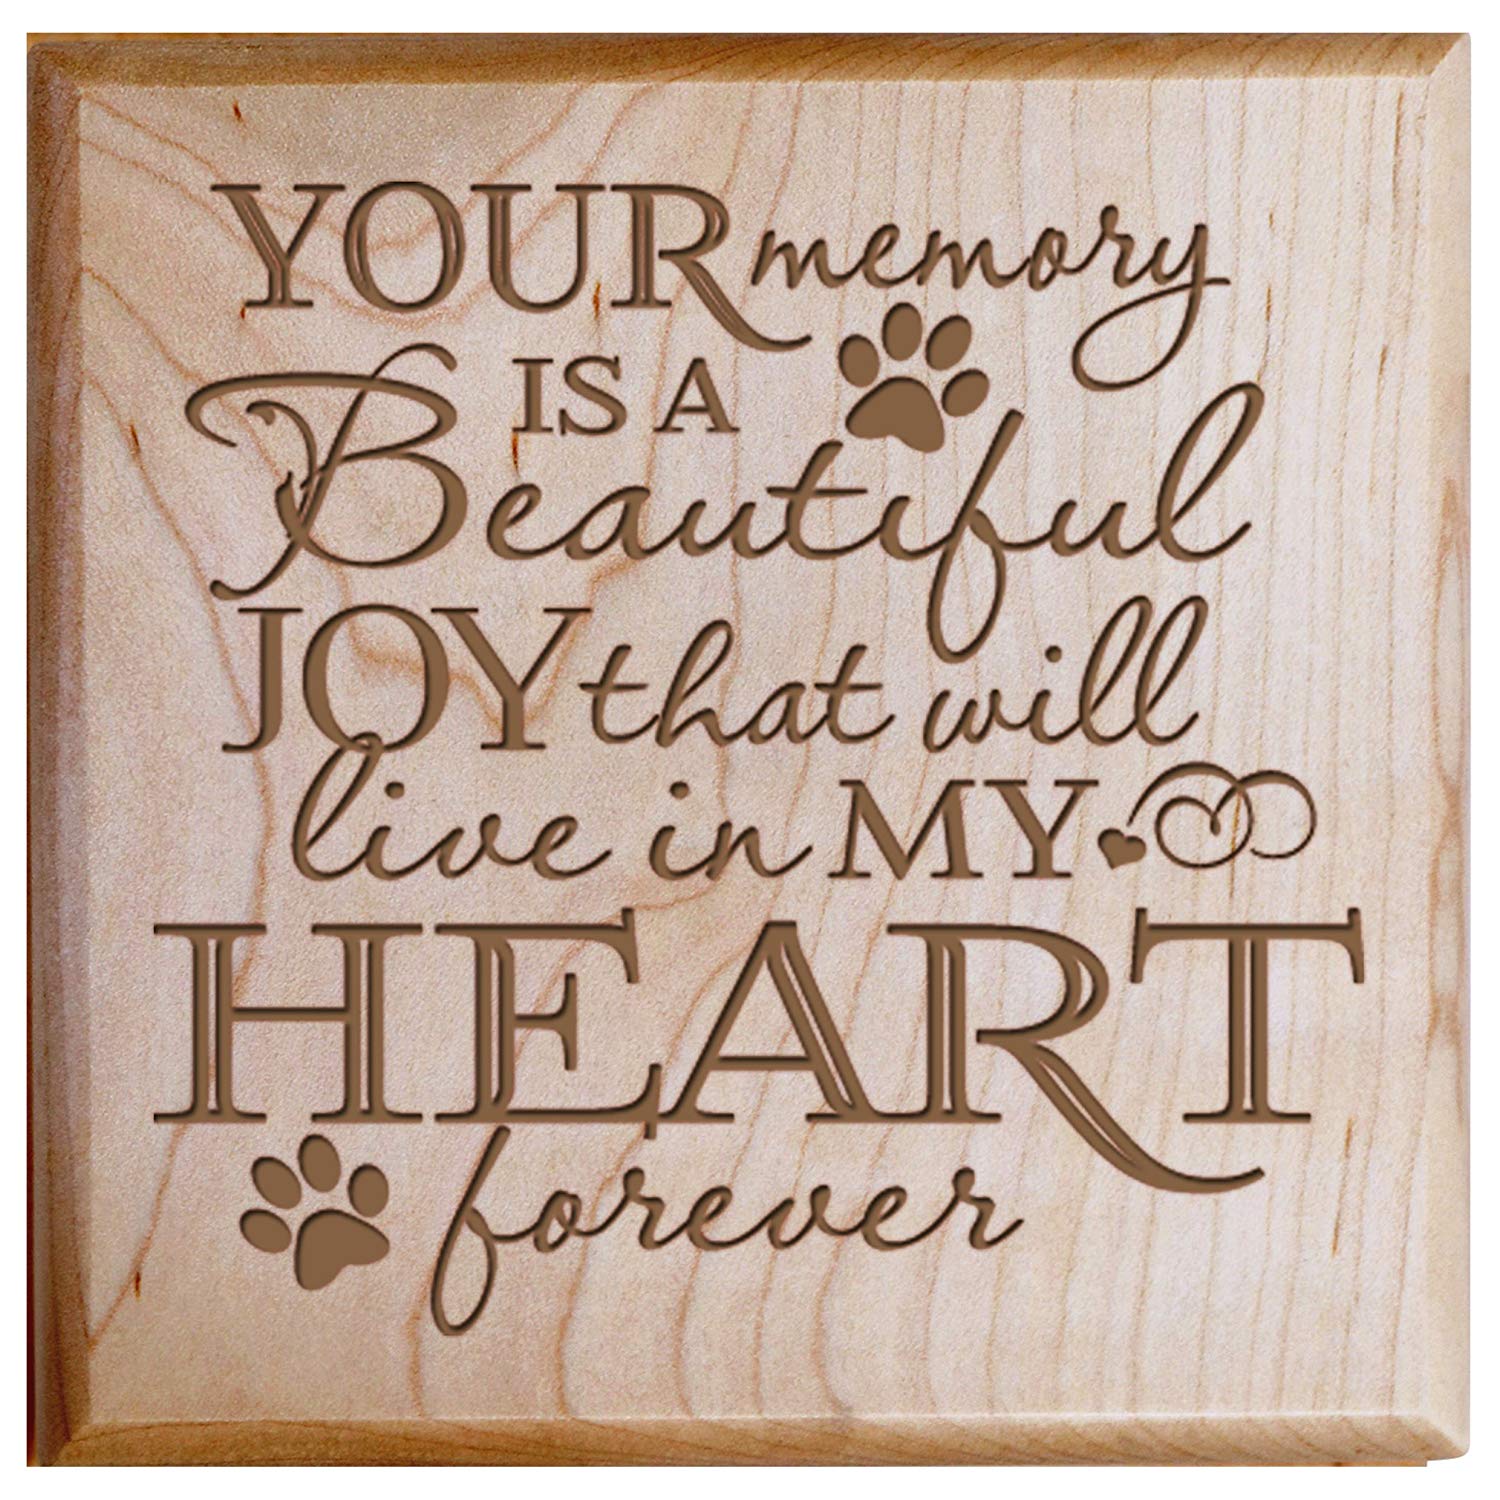 Custom Wooden Cremation Urn for Pet Ashes 5.5 x 5.5 Your Memory - LifeSong Milestones